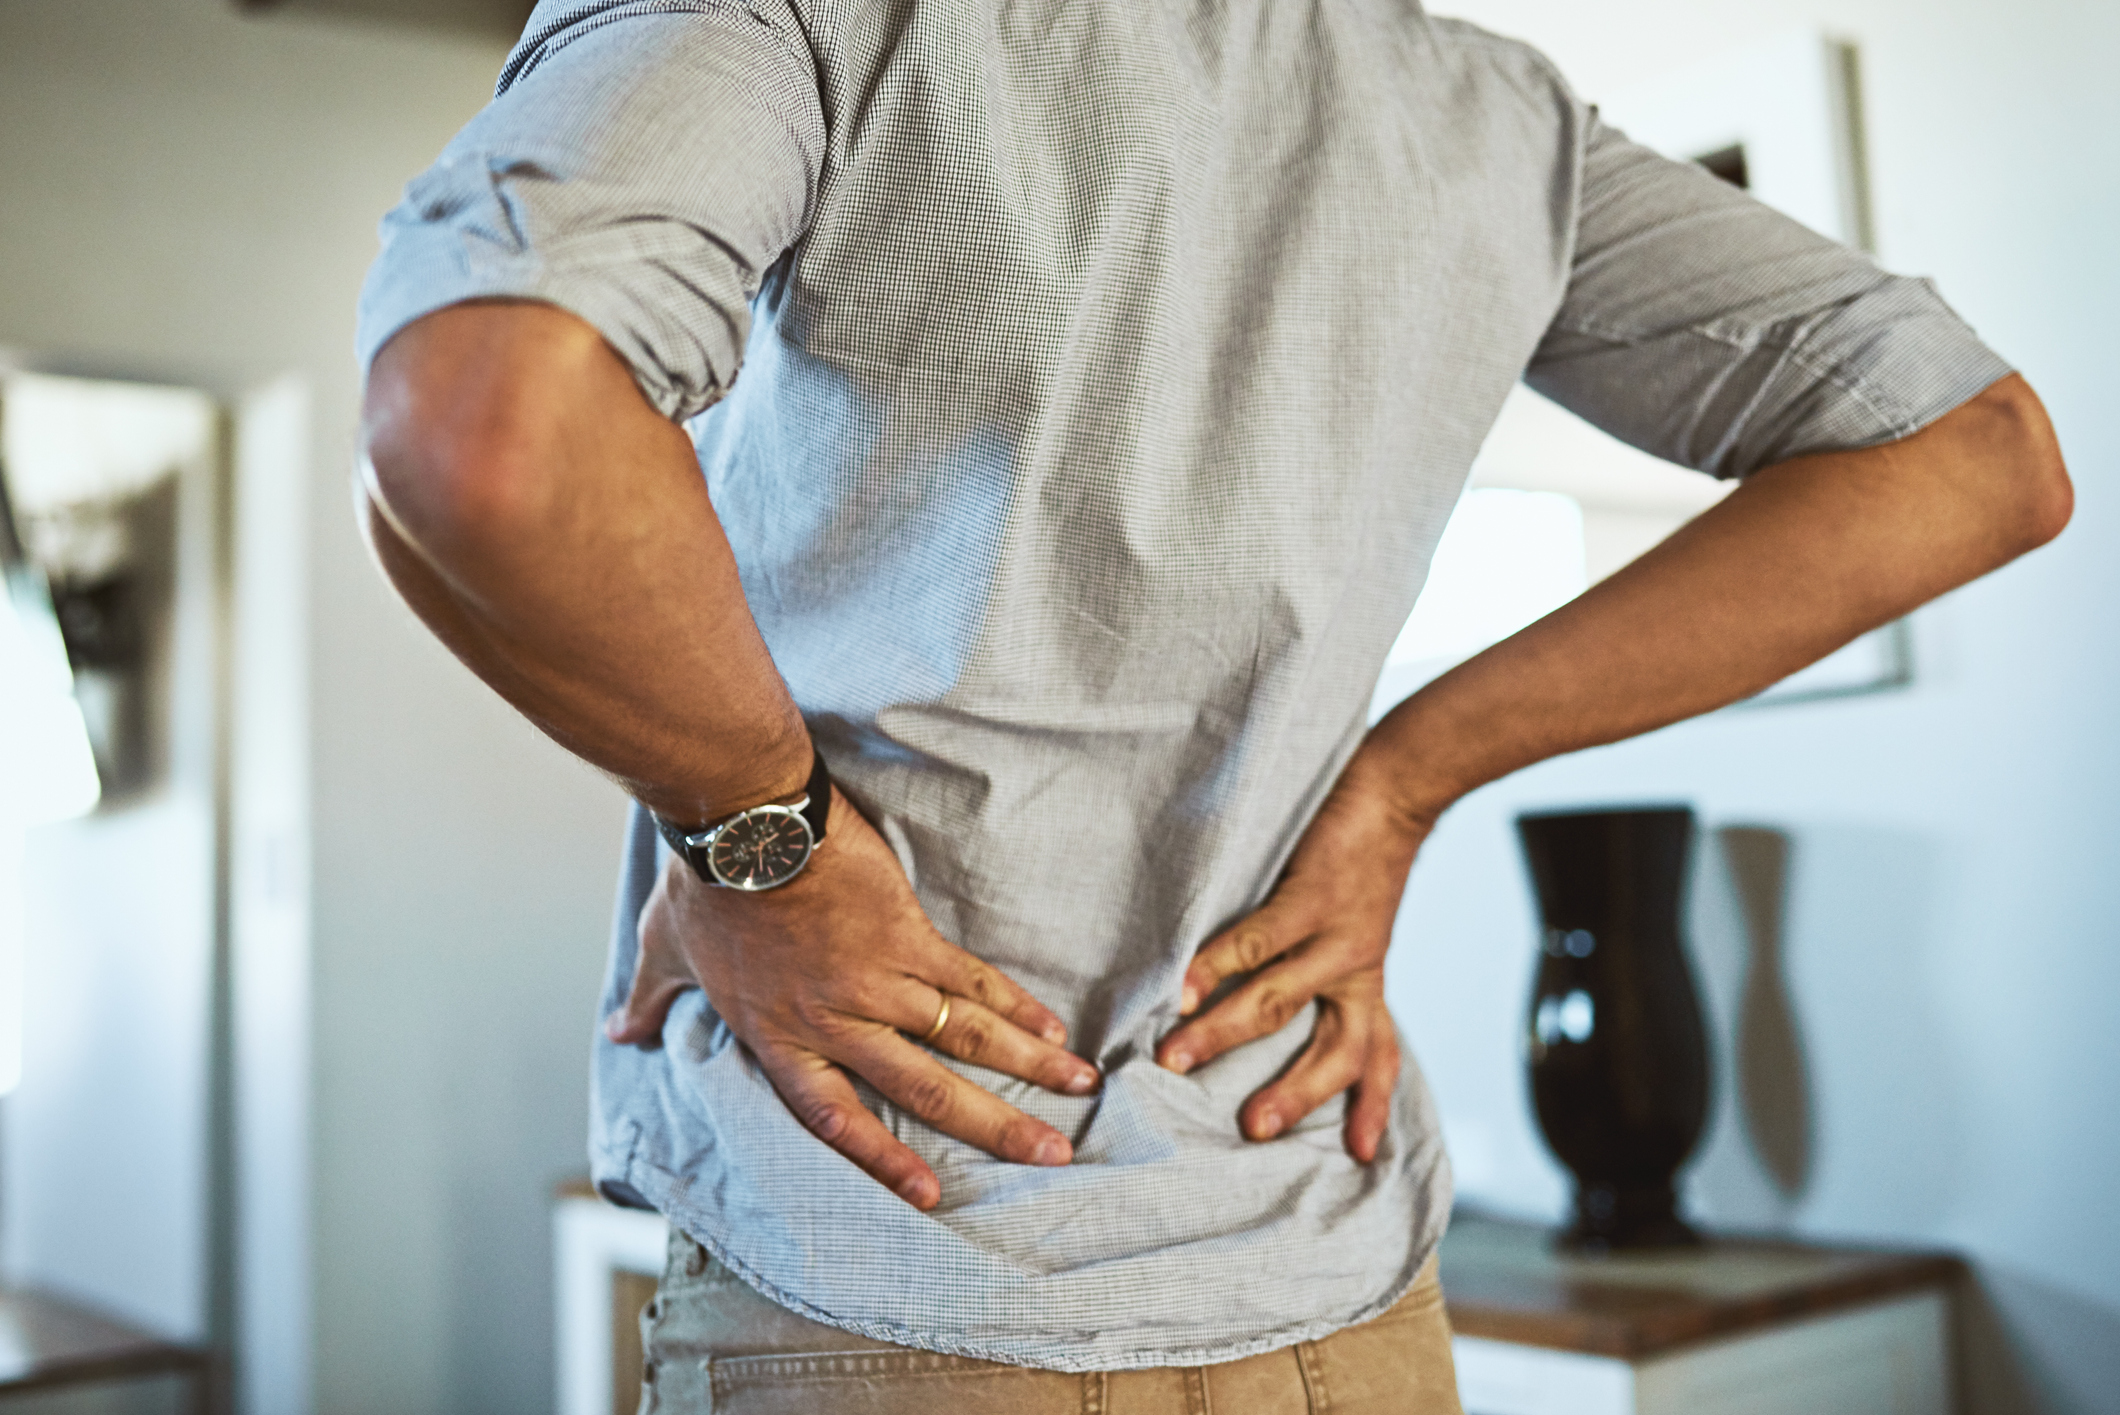 GettyImages-923681846_Low Back Pain for Website.jpg